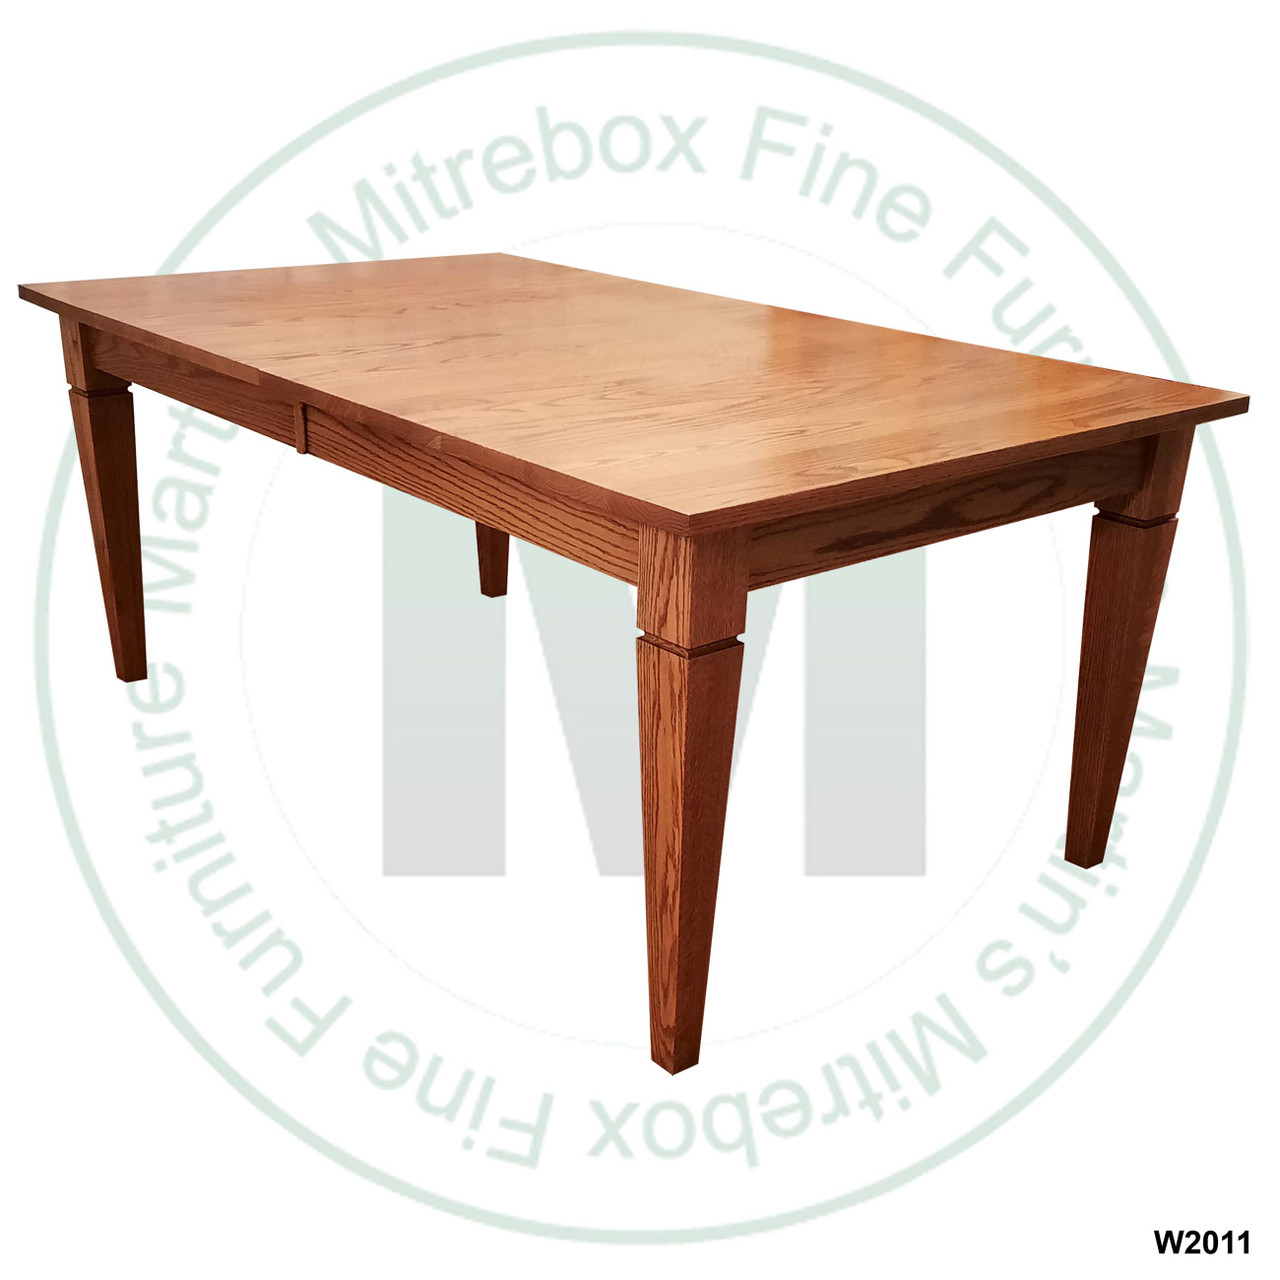 Oak Reesor Solid Top Harvest Table 48''D x 48''W x 30''H Table Has 1 3/4'' Thick Top